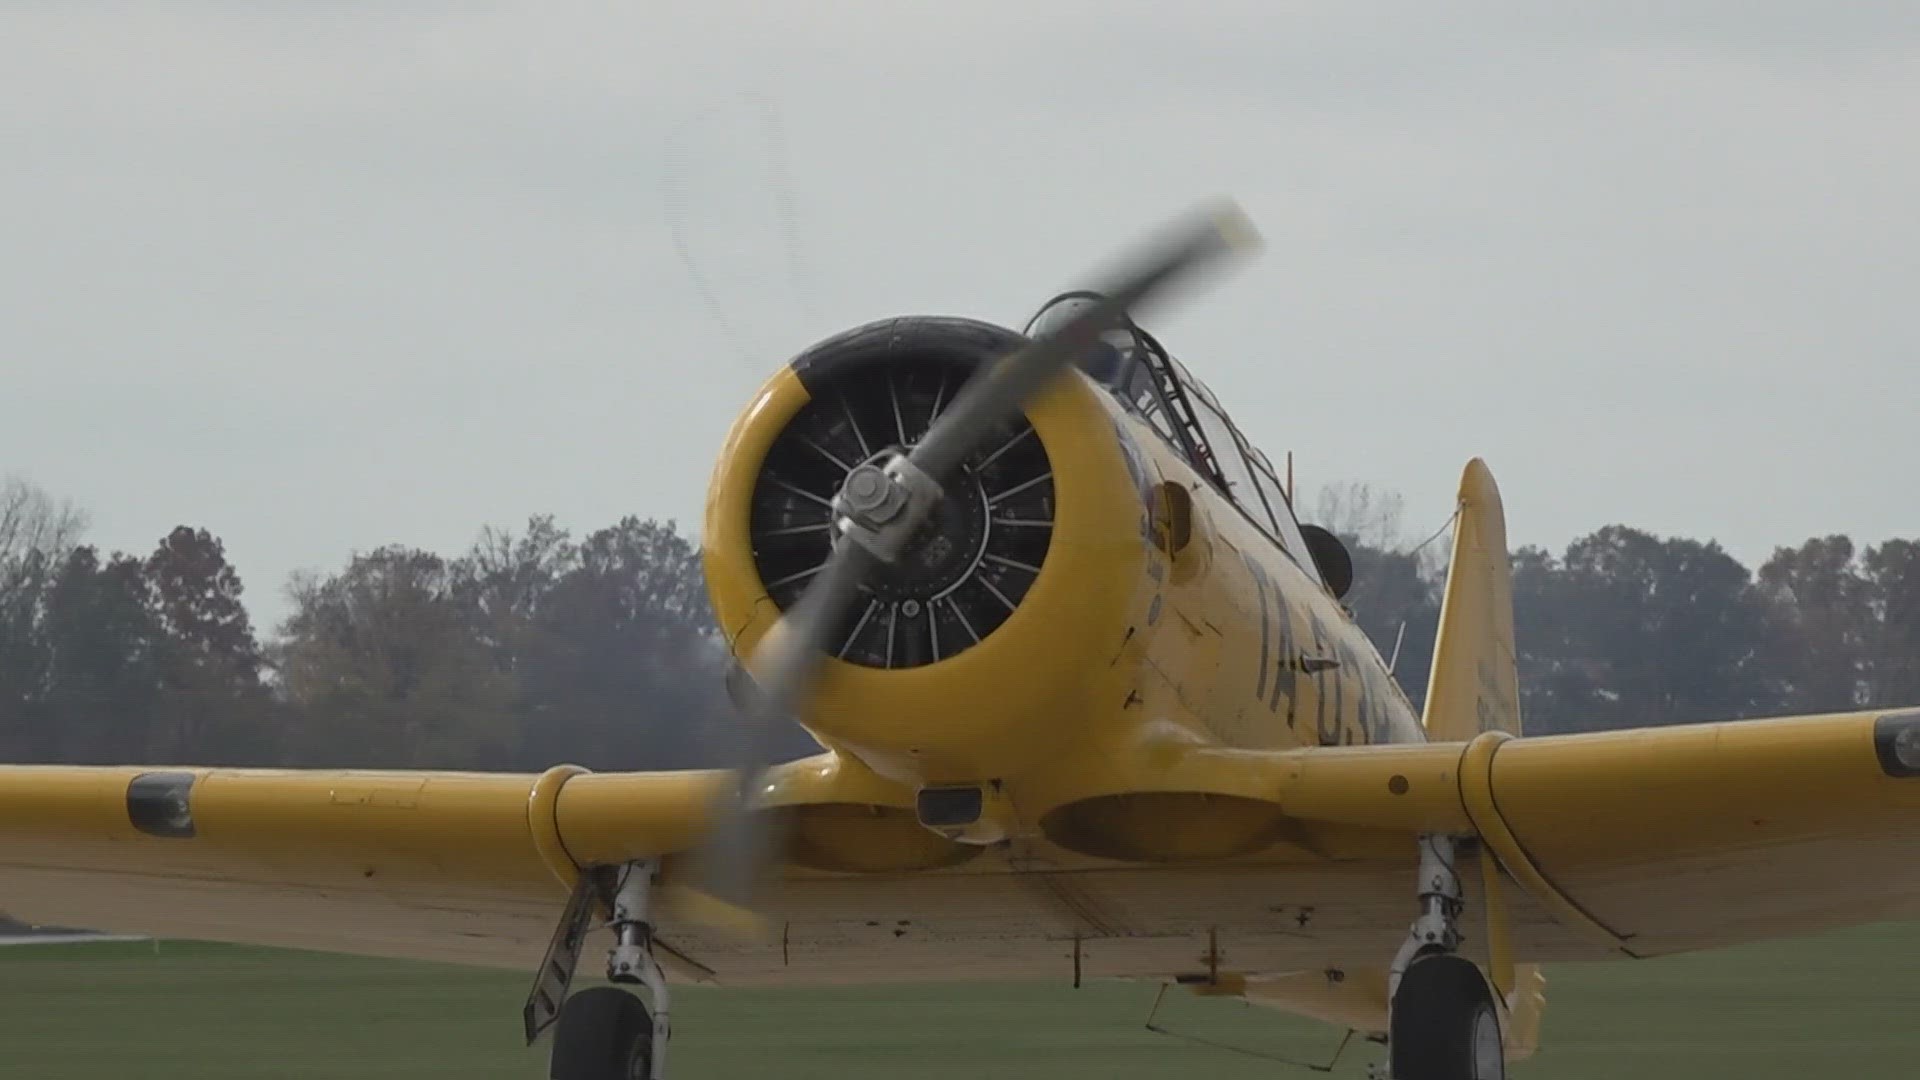 Crossroads Air Show returning to Indiana